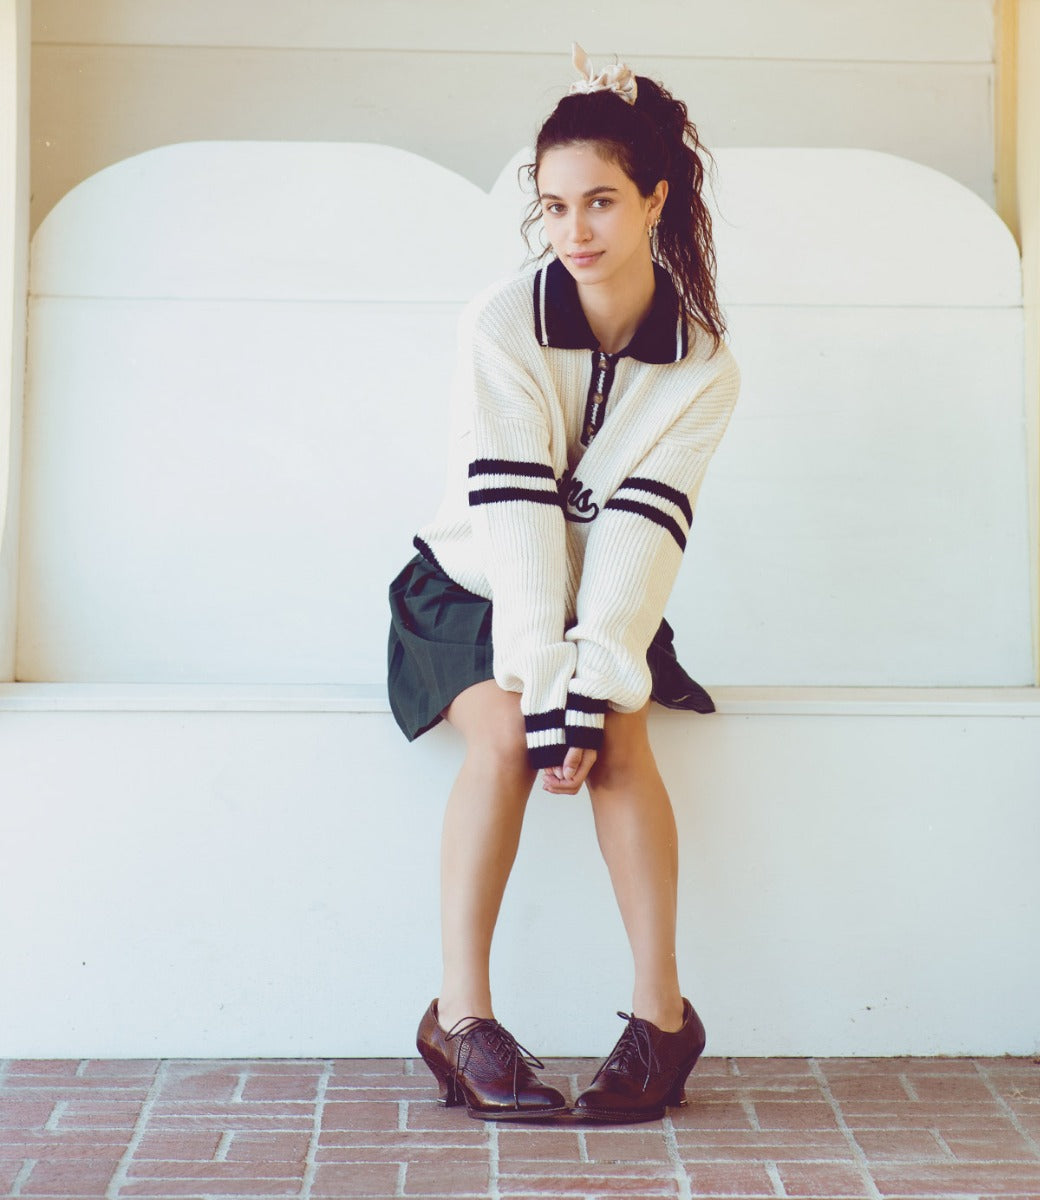 A girl sitting on a bench wearing a sweater and skirt, completing her neutral look with Oak Tree Farms lace-up front leather shoes named Janet.